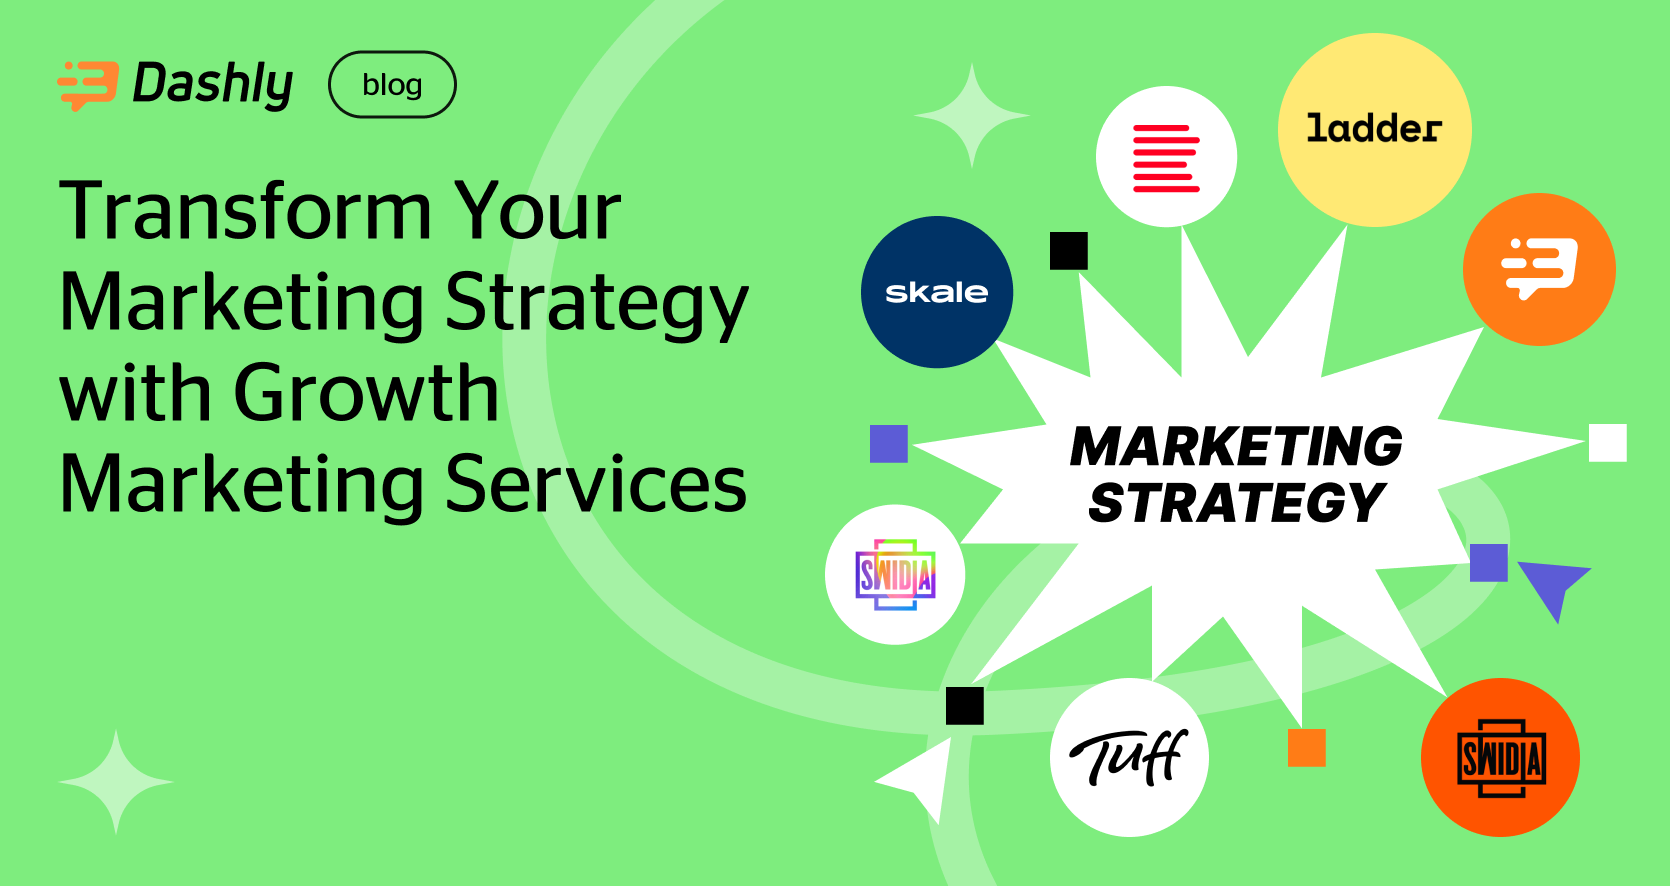 6 growth marketing services for your business - Dashly blog